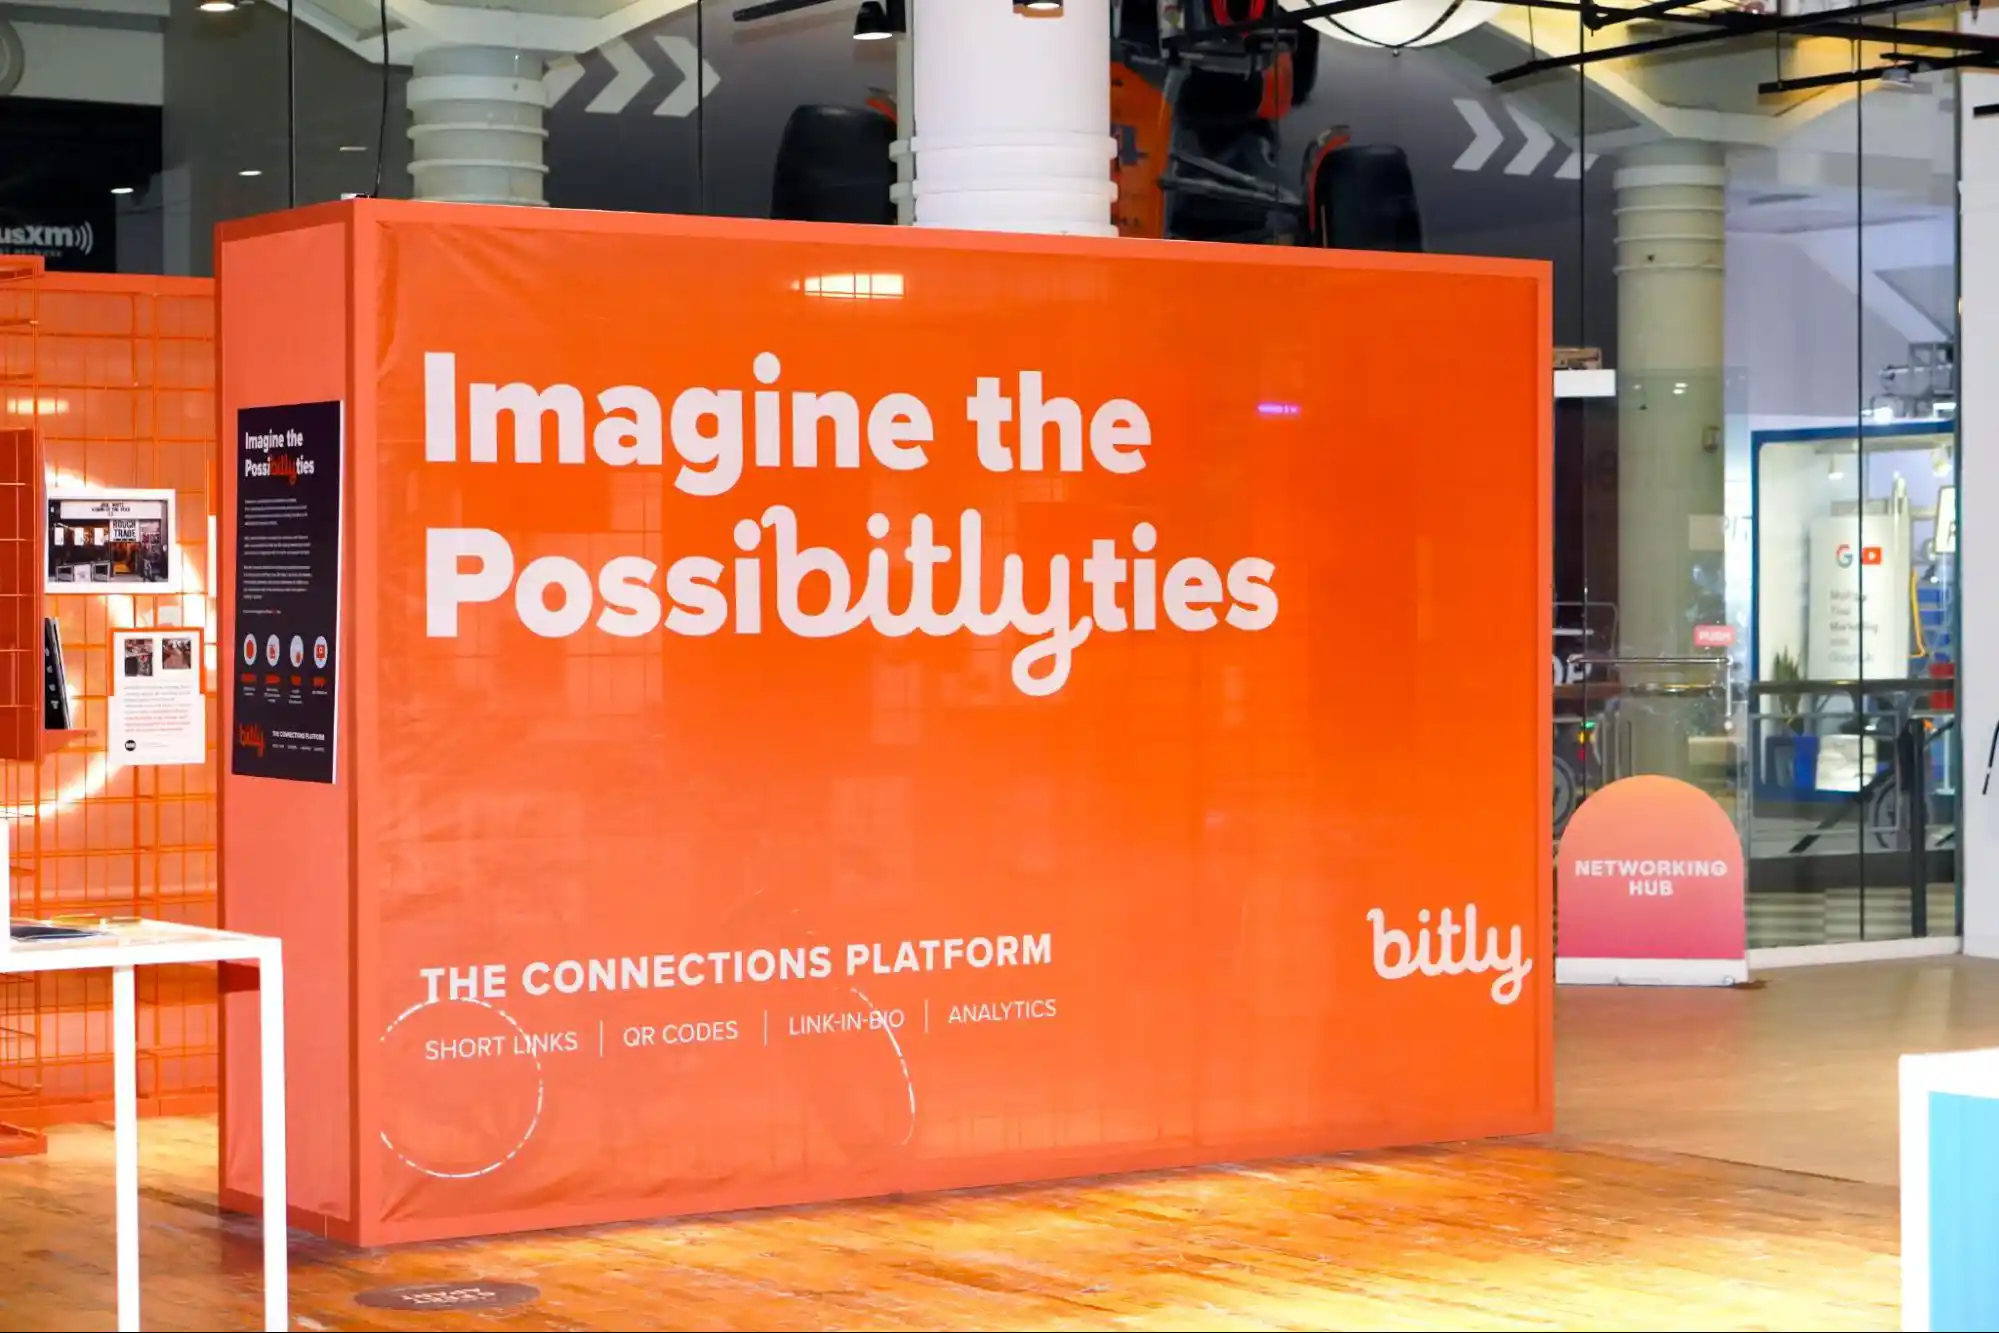 Photo of the "Imagine the Possibitlyties" booth at Advertising Week New York.